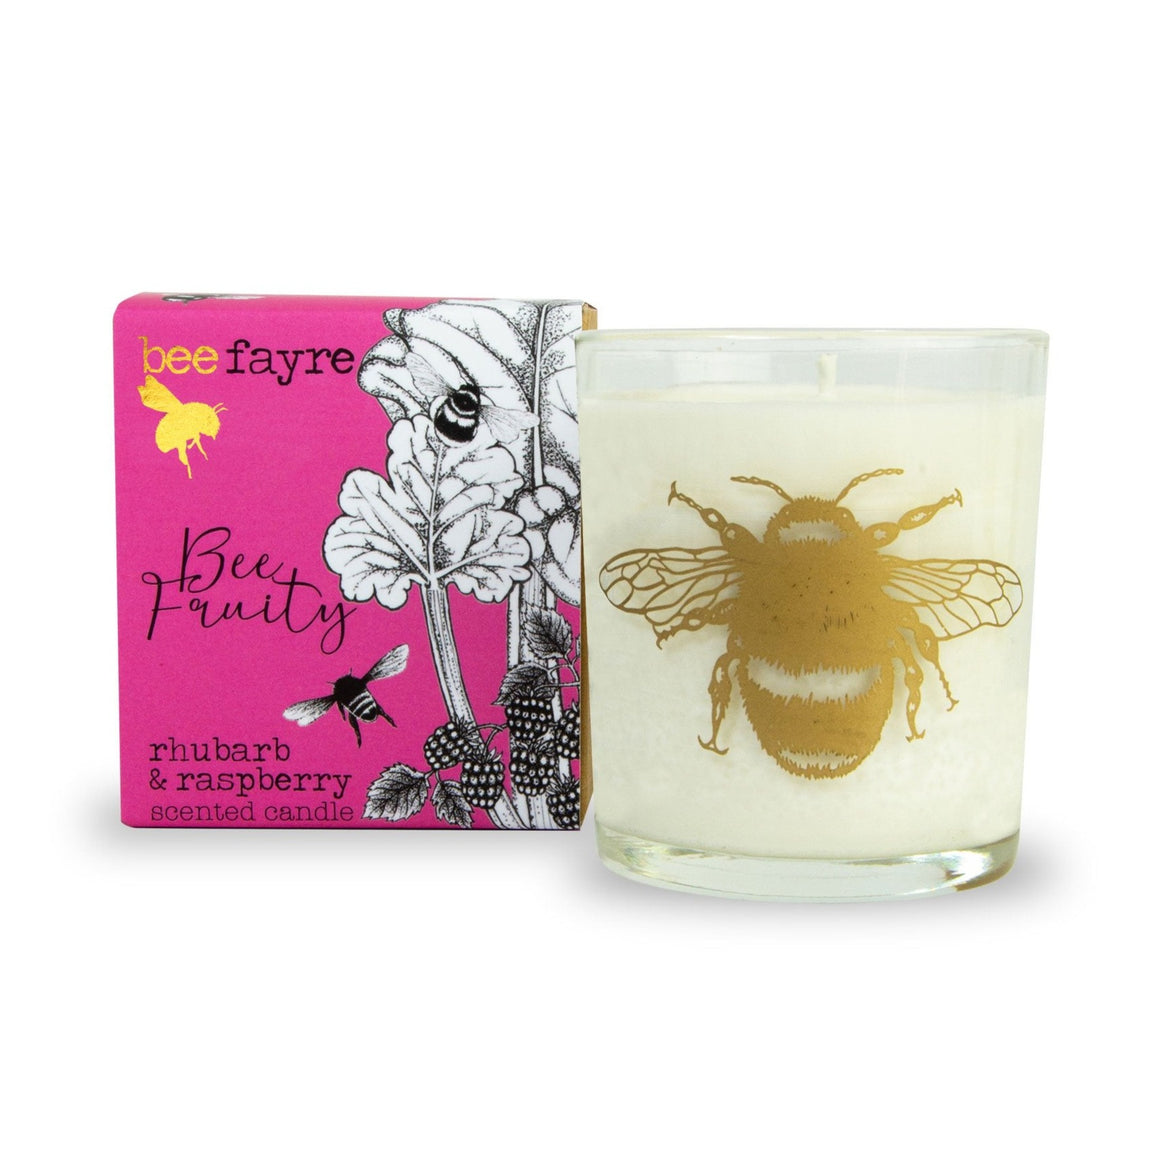 Bee Fayre Bee Fruity Rhubarb & Raspberry Large Scented Candle